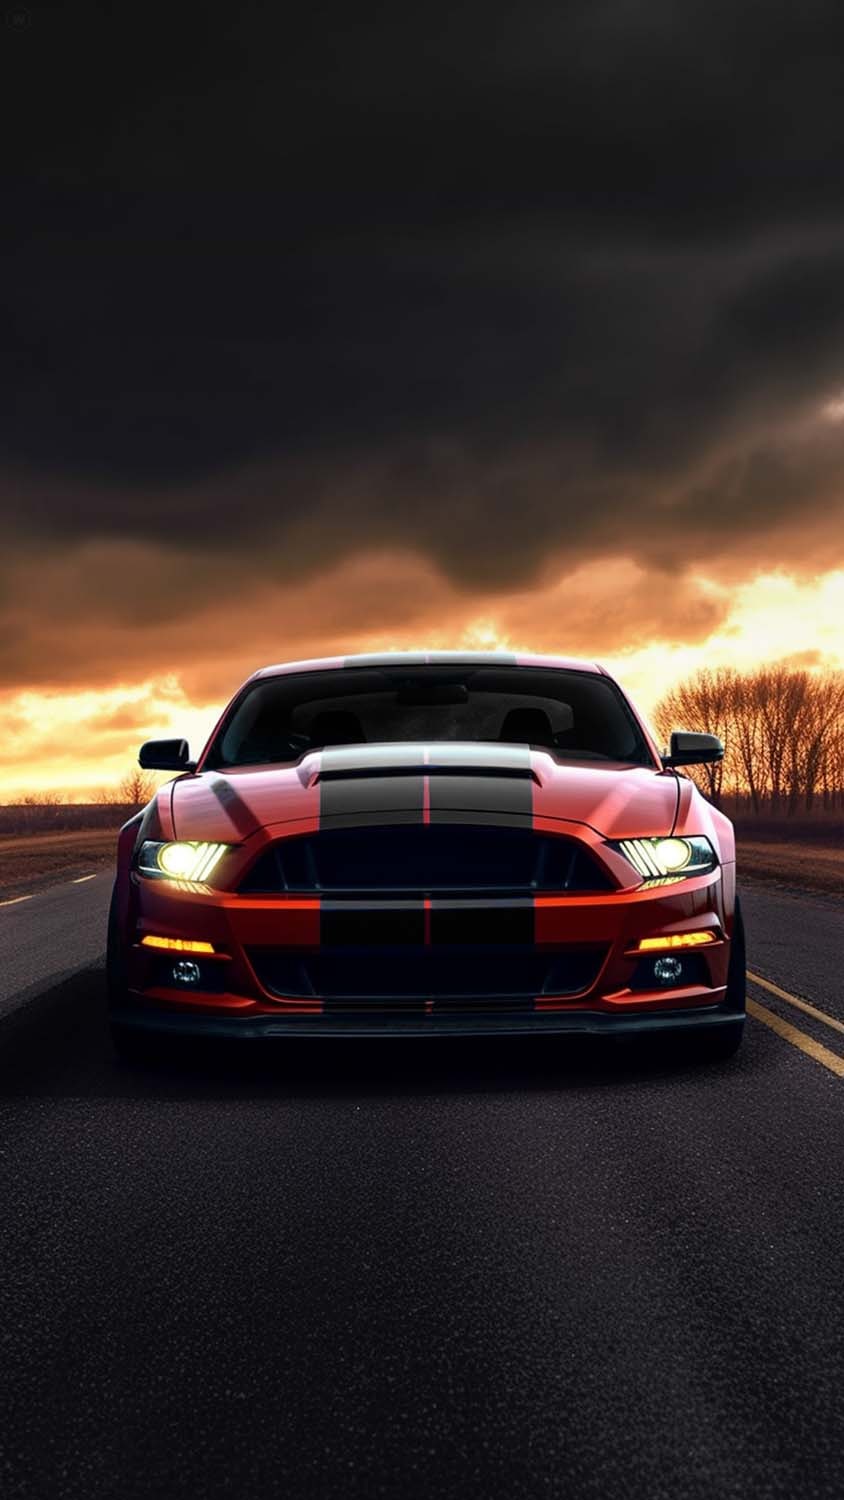 Built Ford Tough wallpaper by CastorTroyN7  Download on ZEDGE  29b0